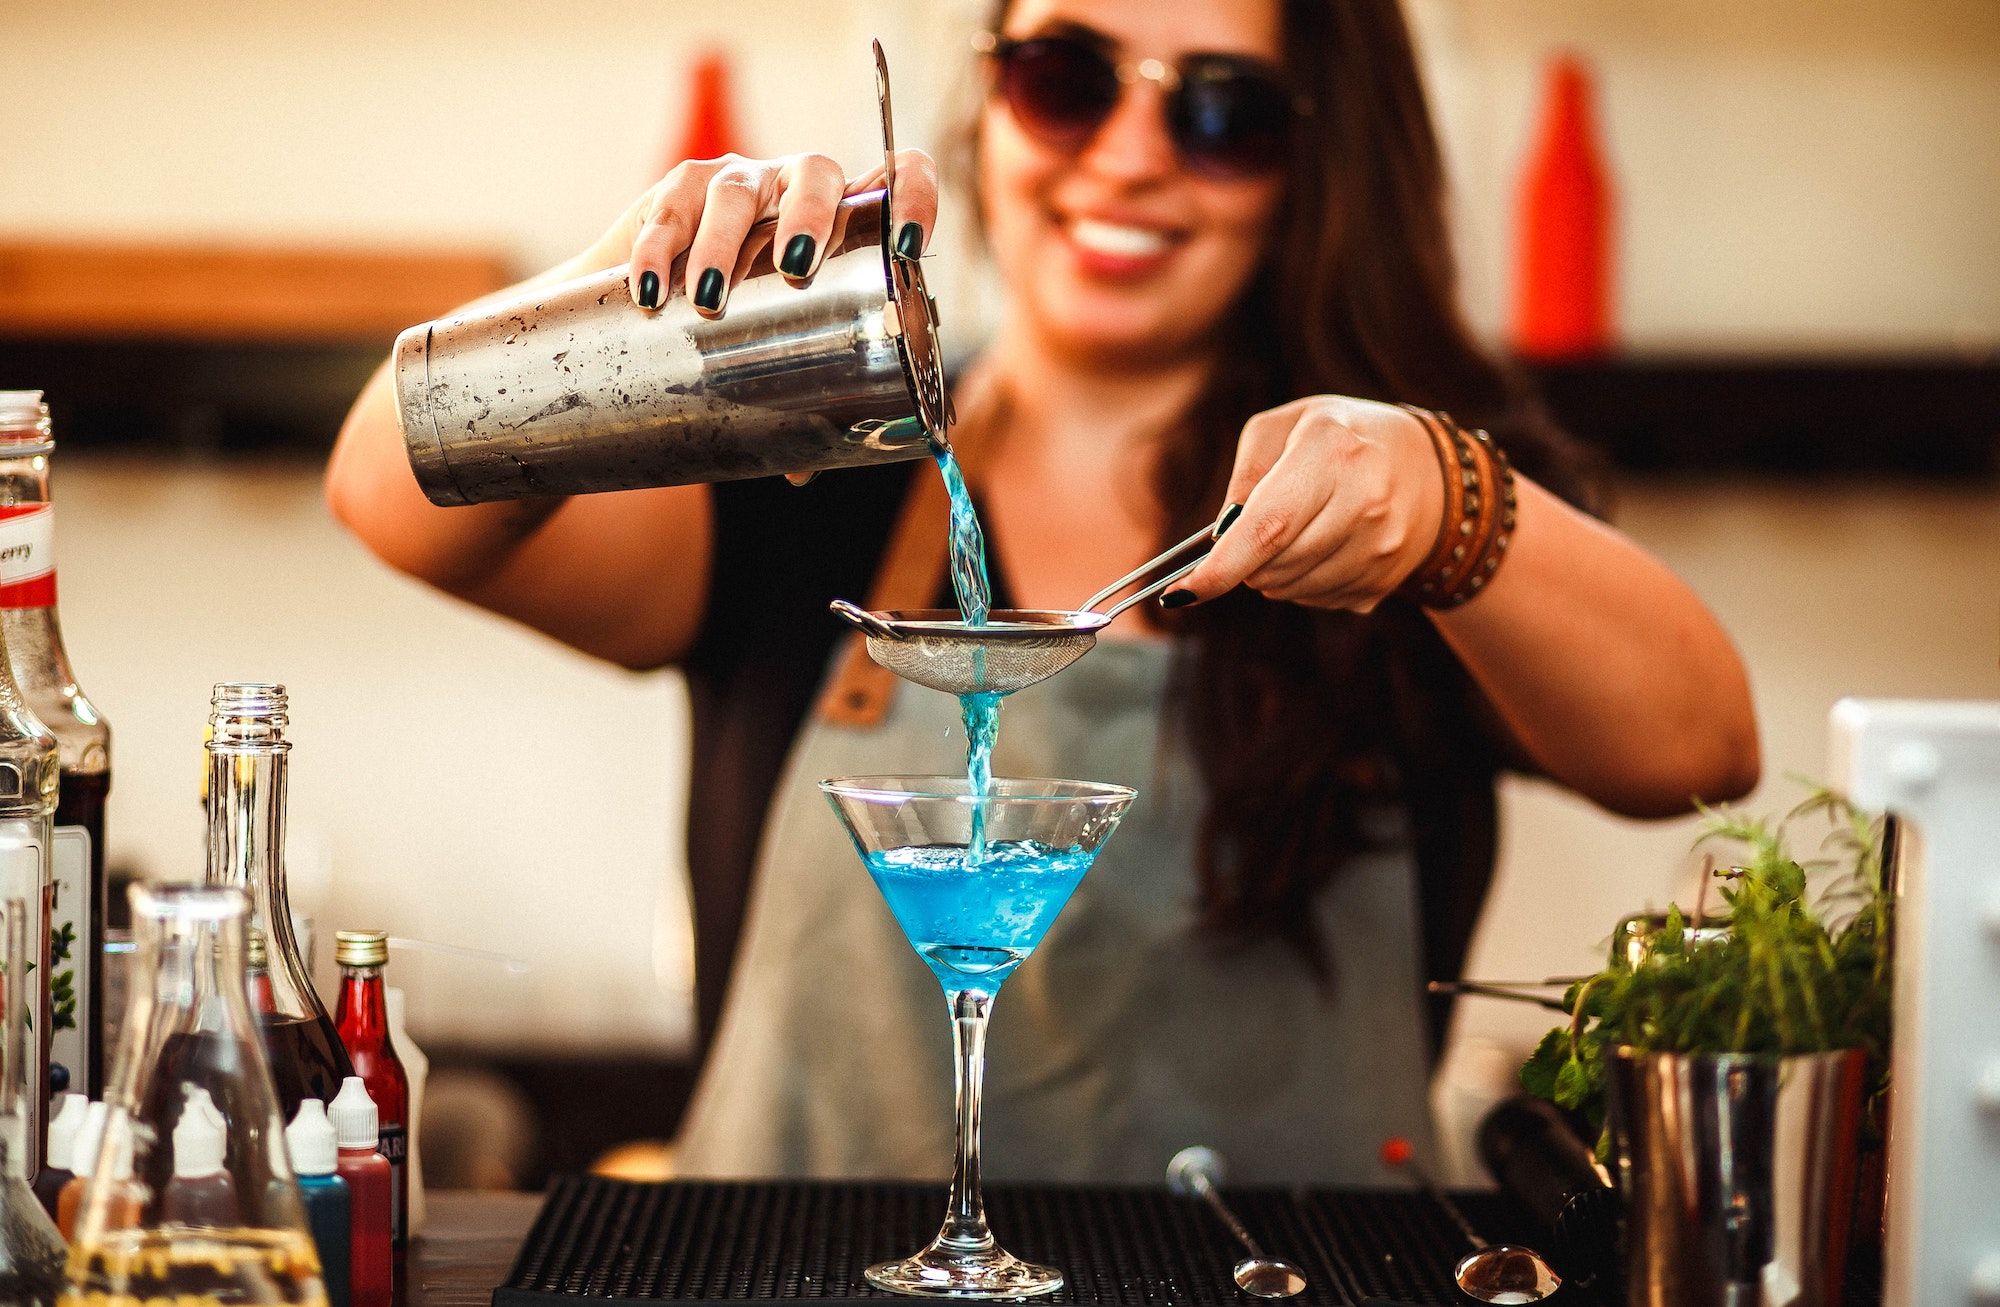 Bartender with long hair and sunglasses pouring a blue liquid from a cocktail shaker into a glass.